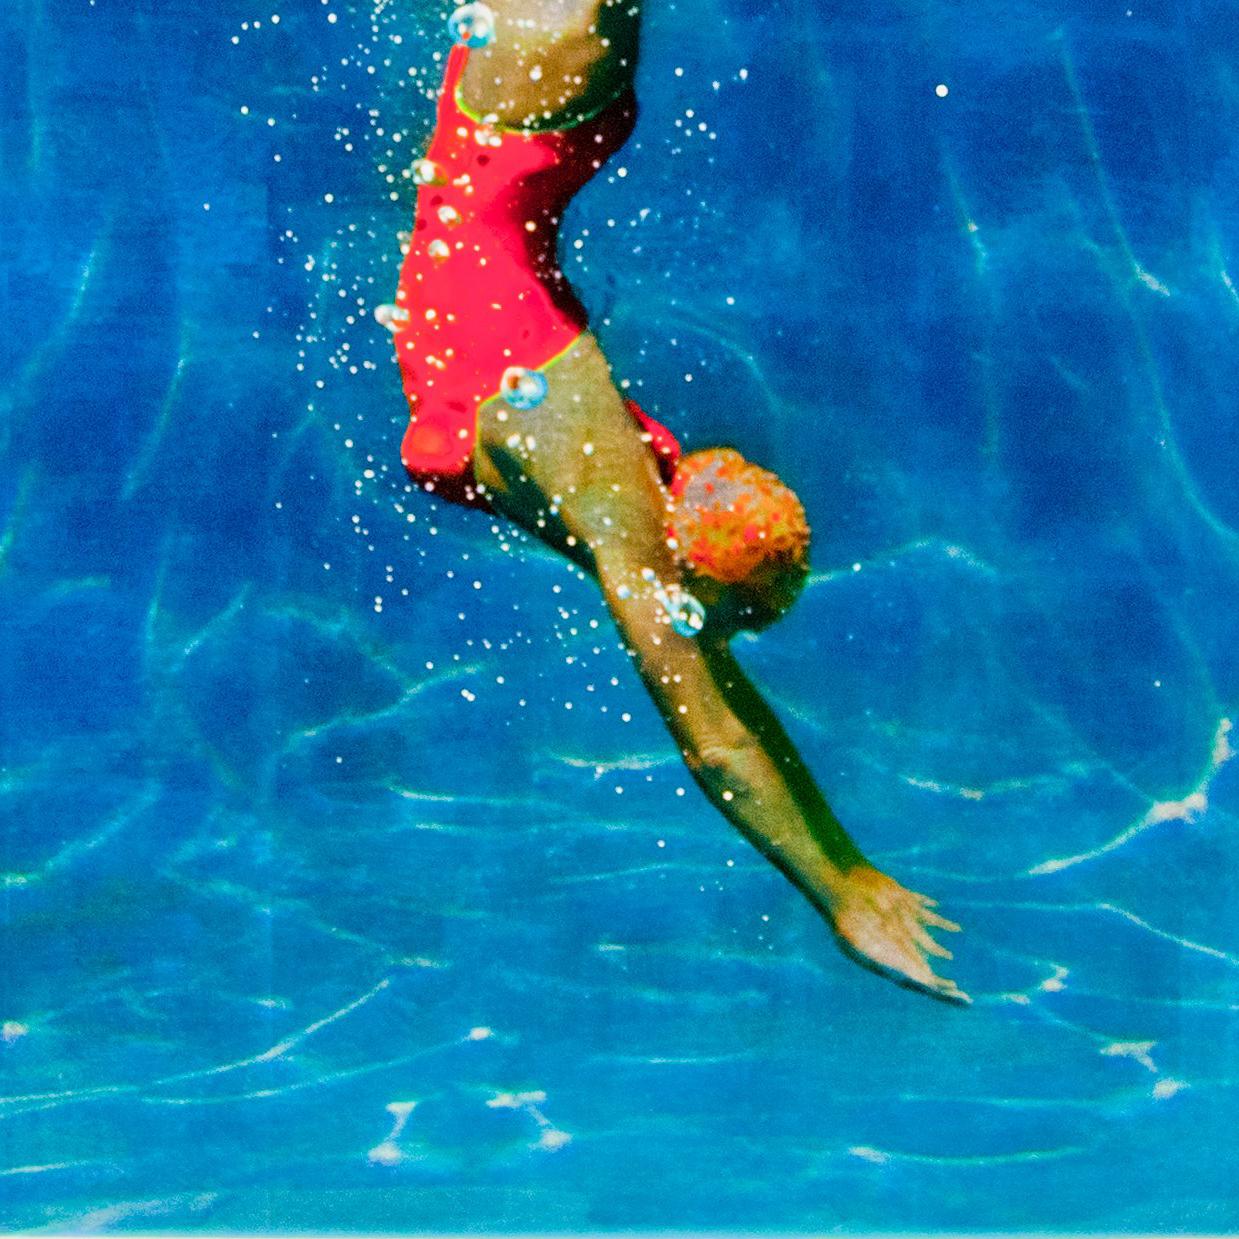 Artist Eric Zener (b. 1966, Astoria, Oregon) is an American photorealist artist best known for figure paintings of lone subjects, often in or about swimming pools. Zener has reinterpreted his interest in water as a metaphor for the human journey. 